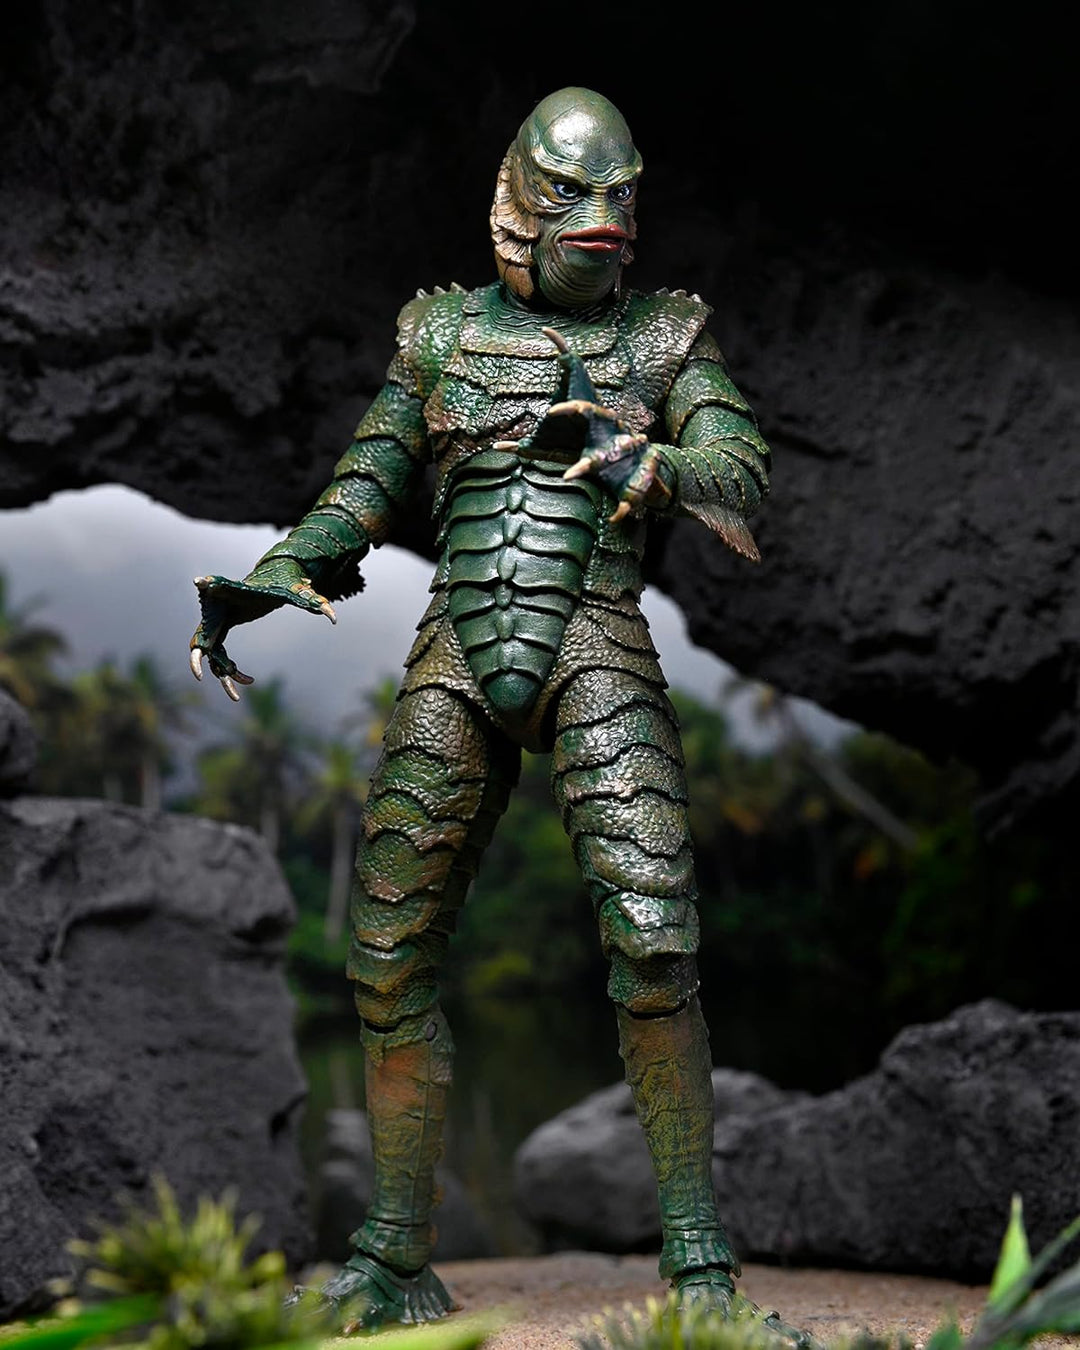 NECA Universal Monsters Ultimate Creature from the Black Lagoon (Colour Version) 7" Action Figure